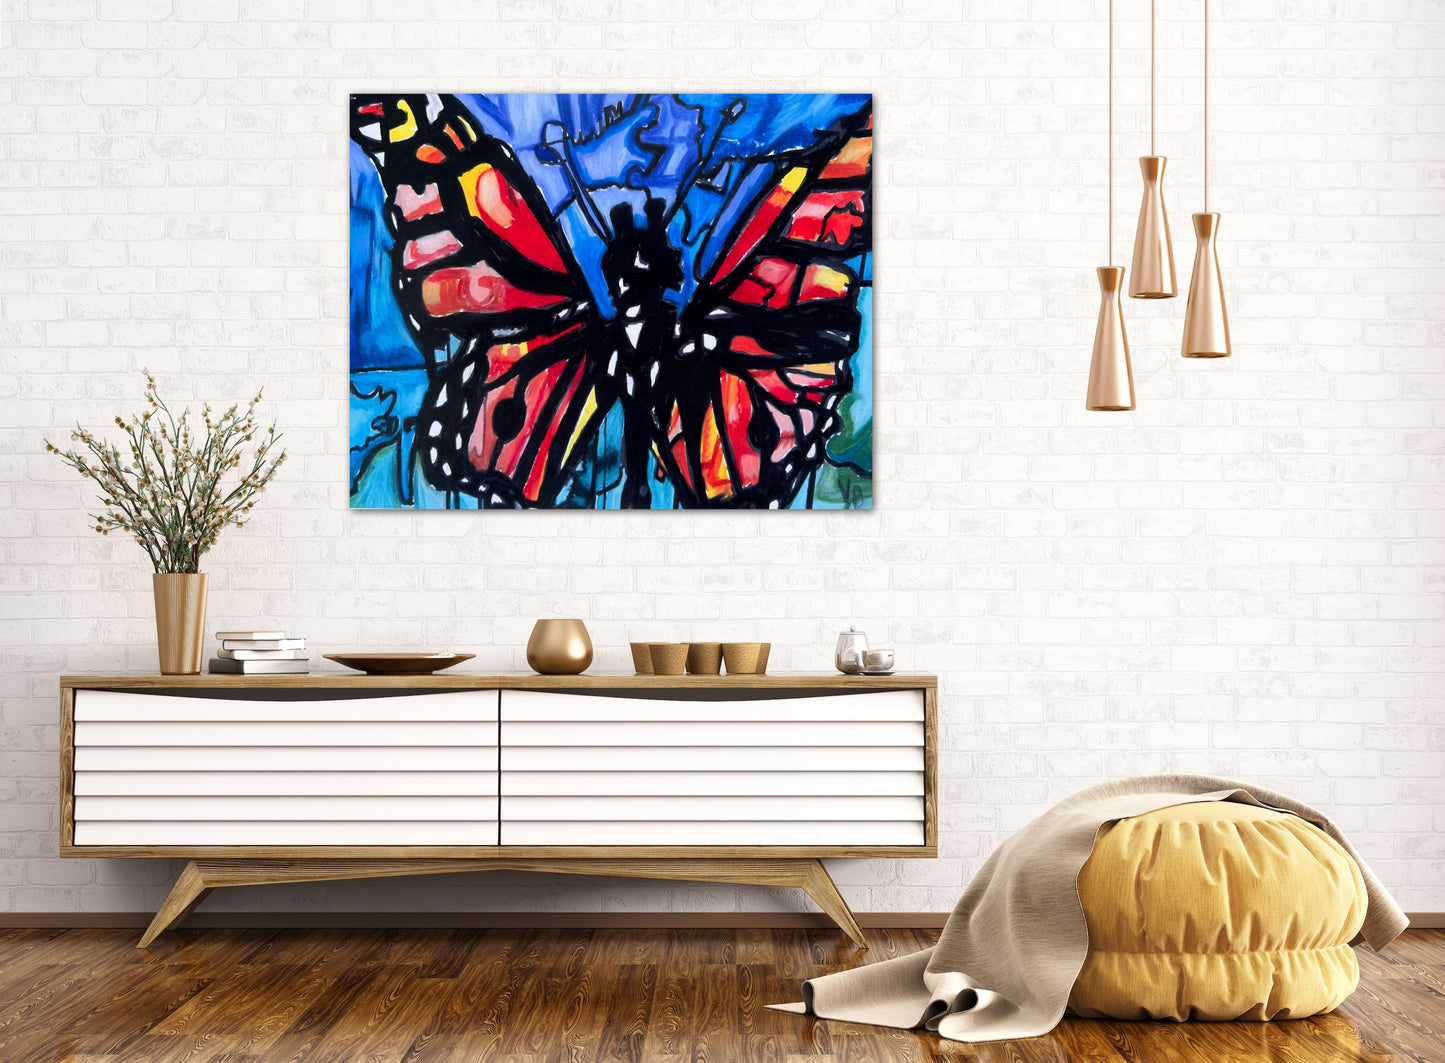 Monarch Butterfly - Print, Poster or Stretched Canvas Print in more sizes